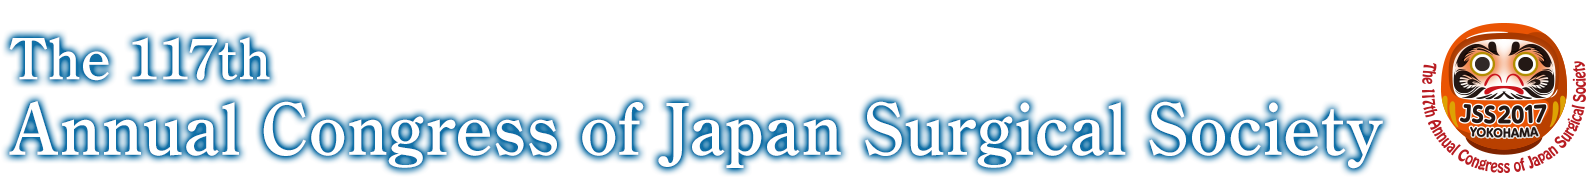 The 117th Annual Congress of Japan Surgical Society